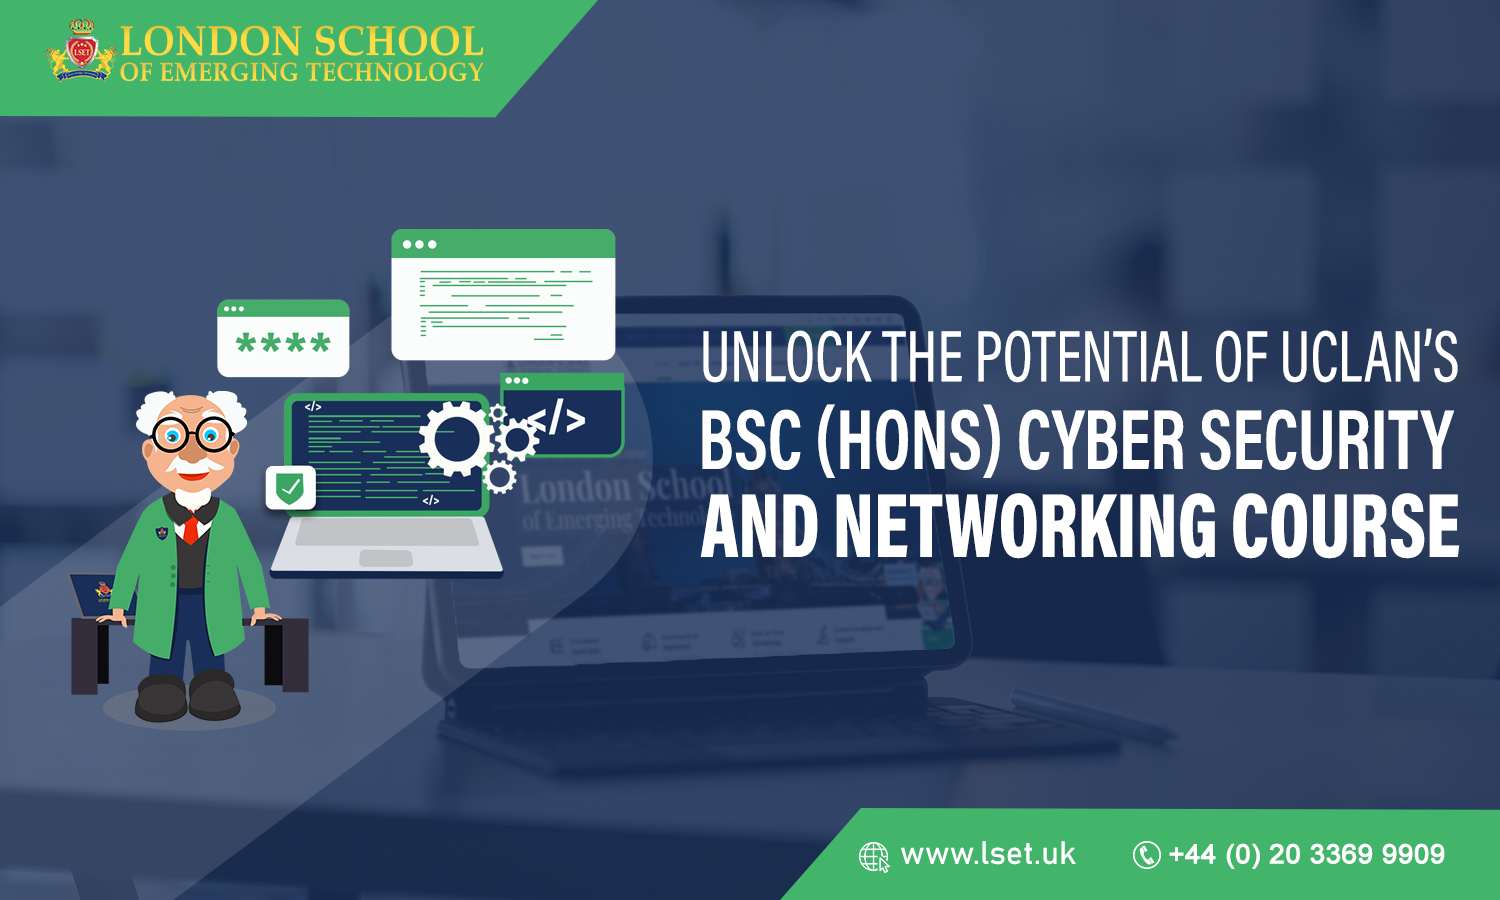 Unlock the Potential of UCLan’s BSc (Hons) Cyber Security and Networking Course img